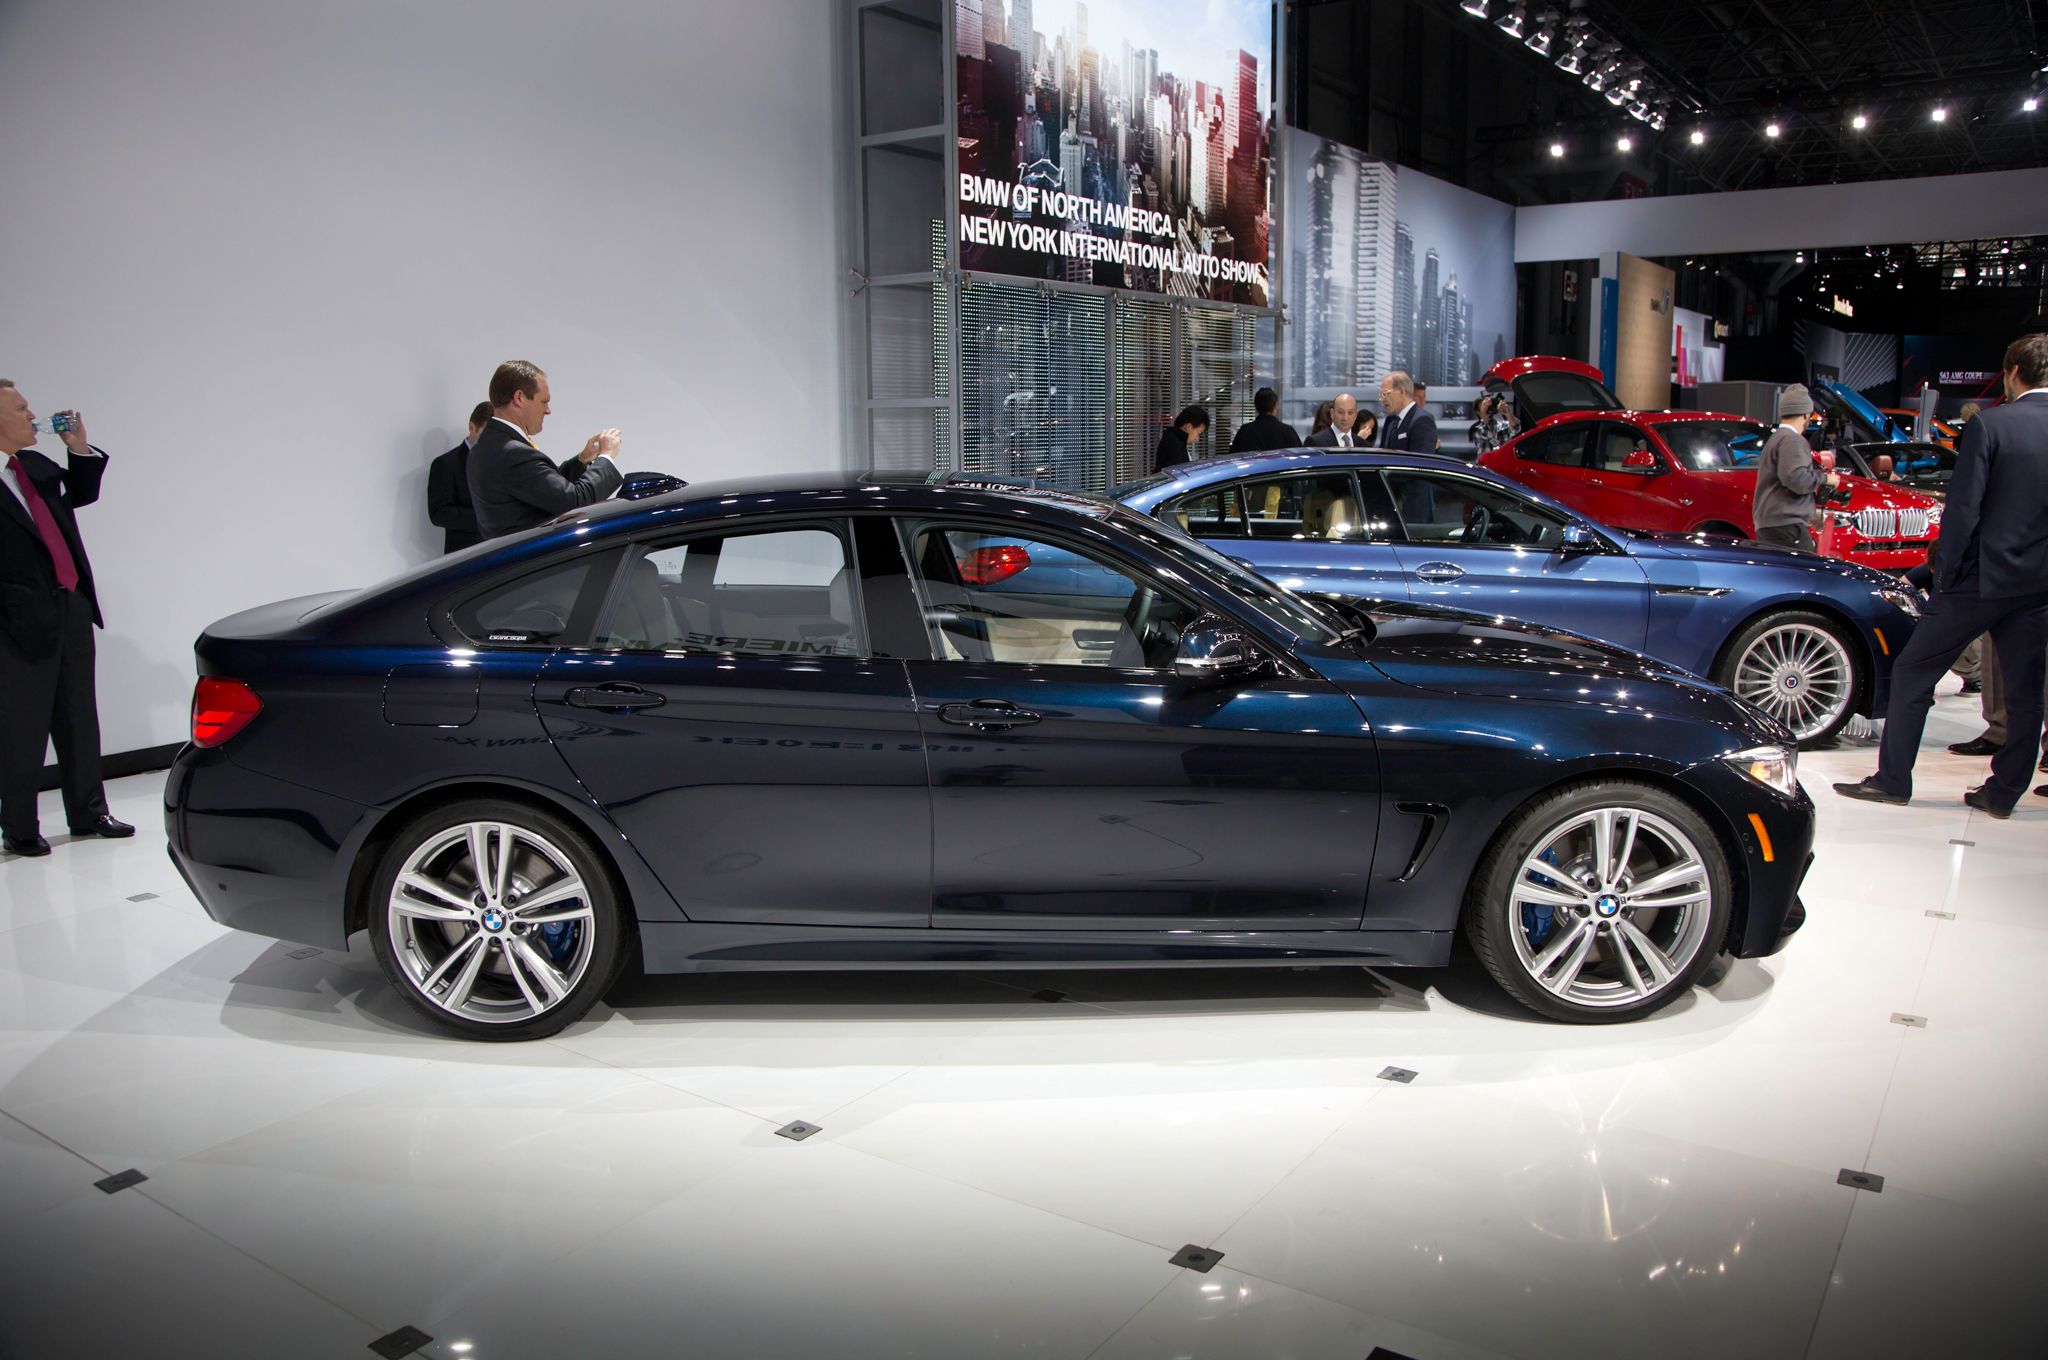 2015 Bmw 4 Series Gran Coupe Black (View 6 of 11)